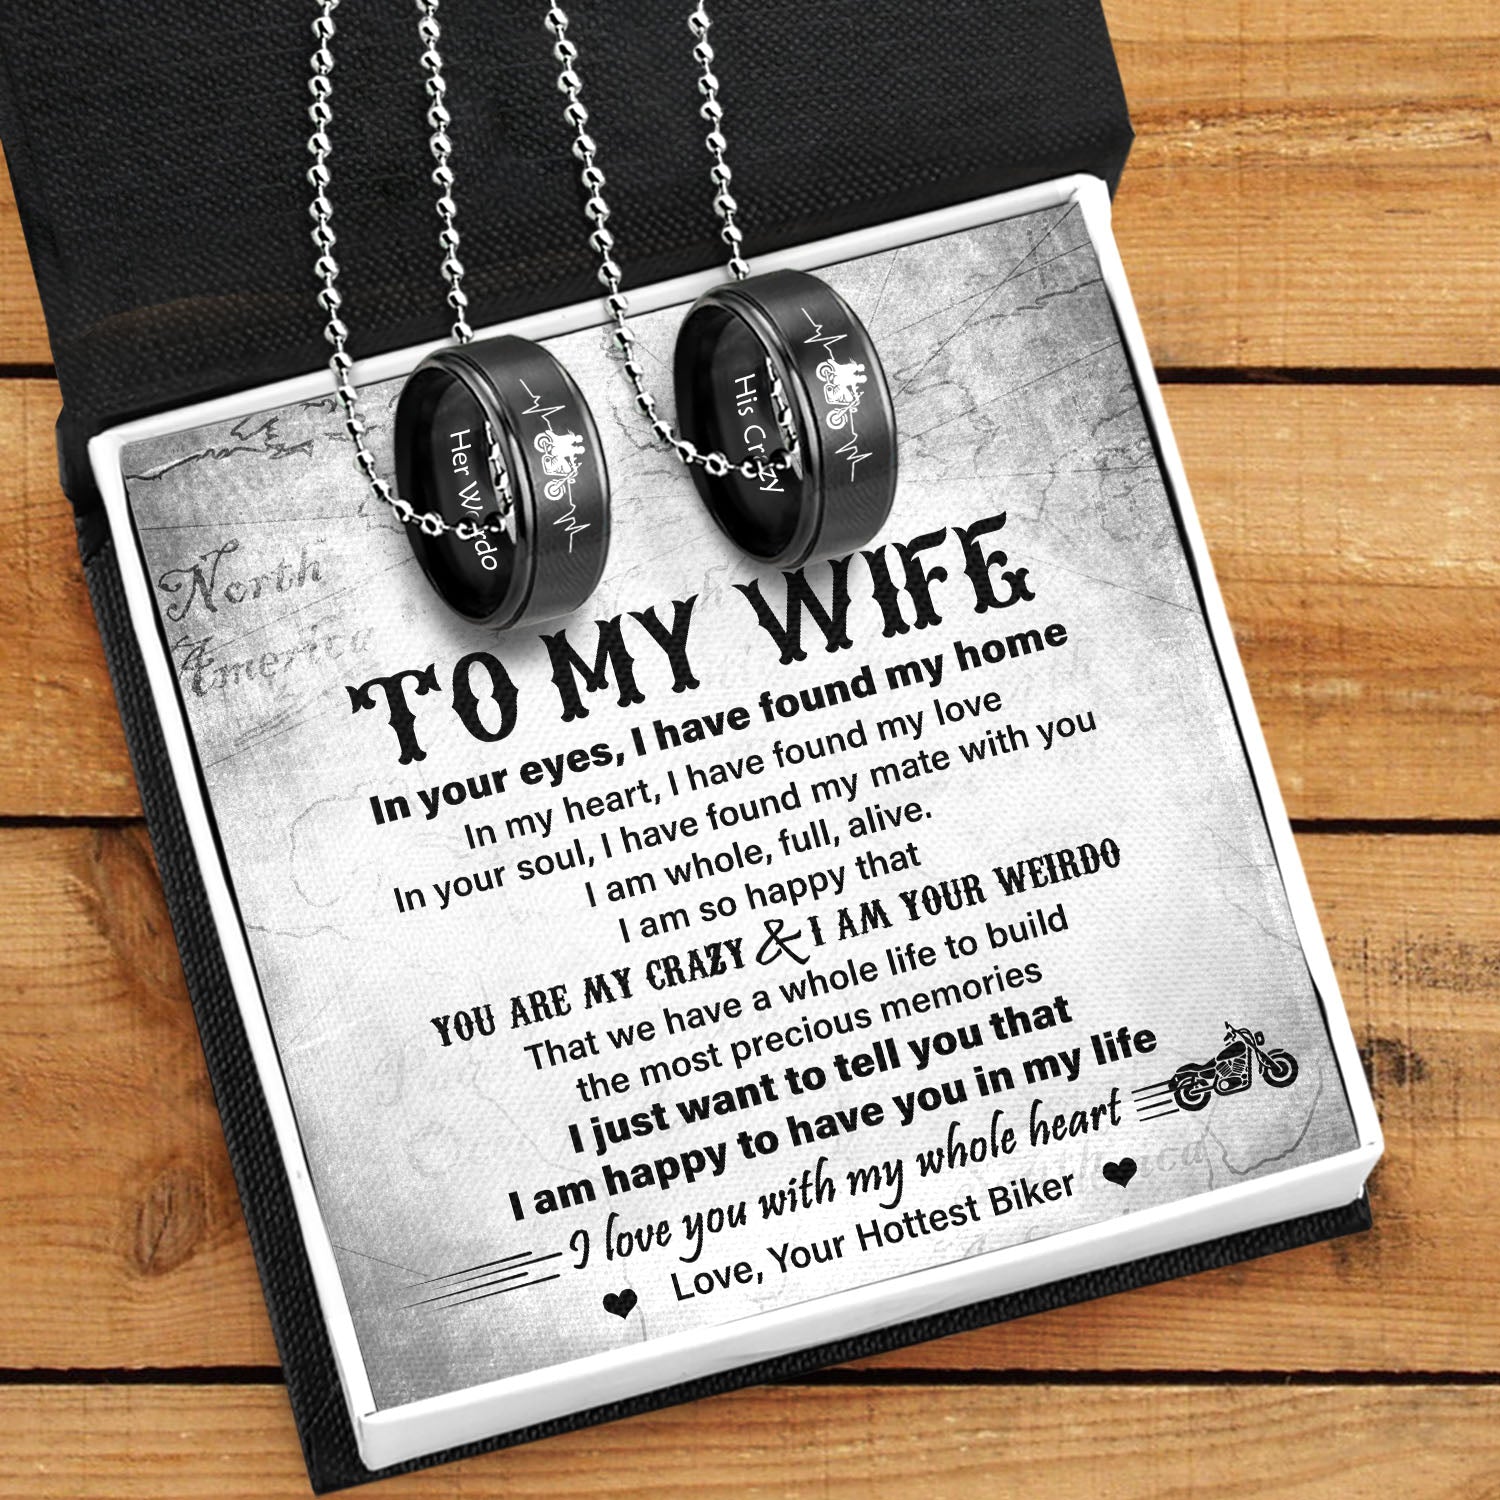 Couple Pendant Necklaces - To My Wife - I Love You With My Whole Heart - Ukgnw15004